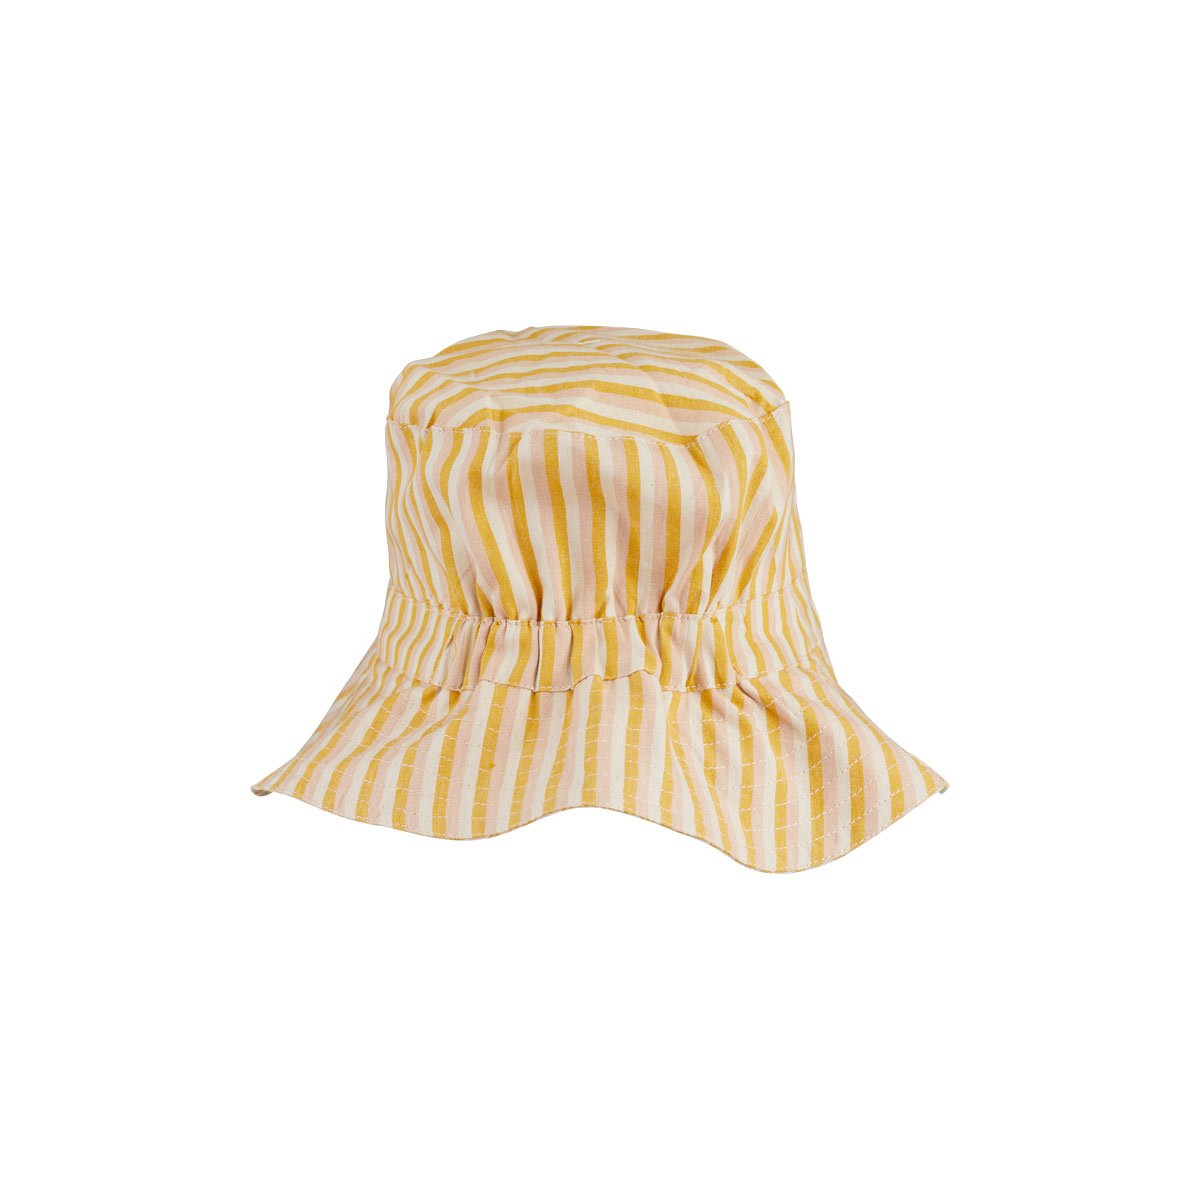 Sander bucket hat (available in 2 colors)